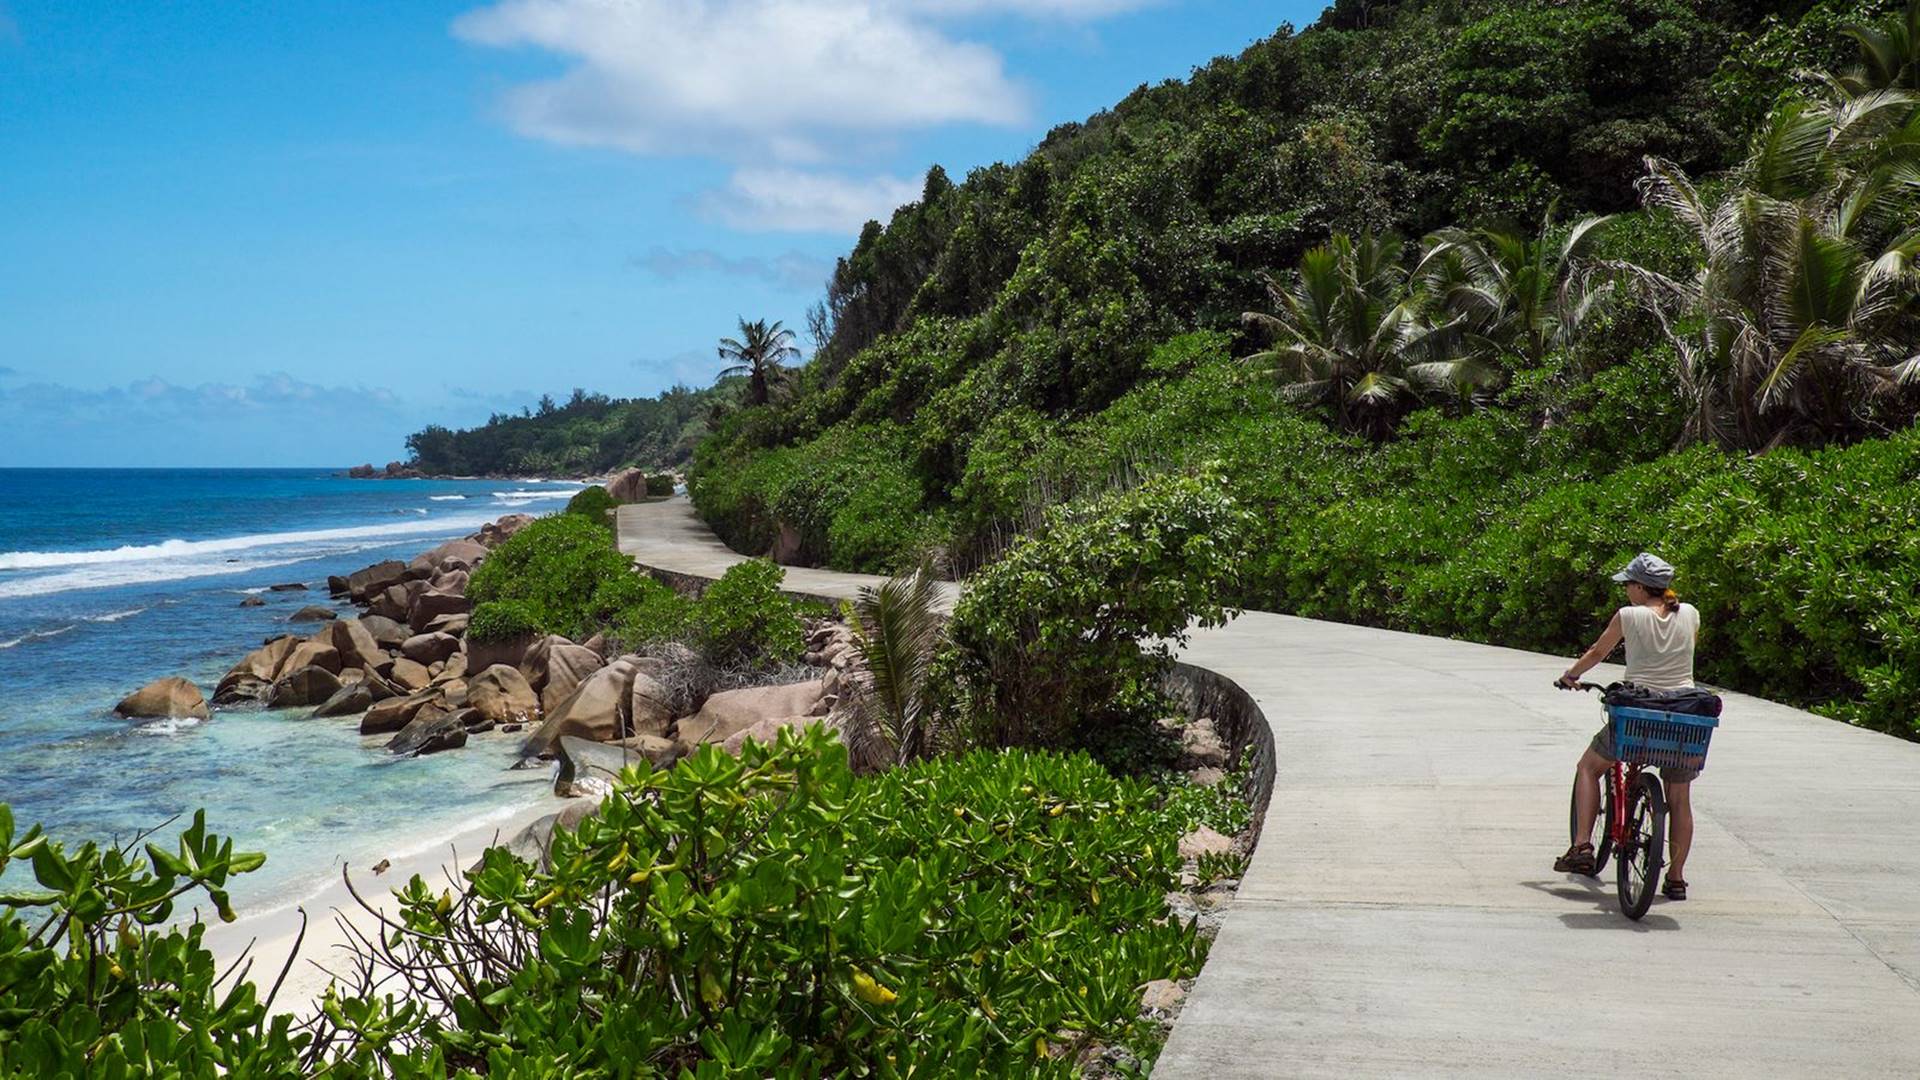 The island banned private vehicles: Plus, it has one of the world's most beautiful beaches